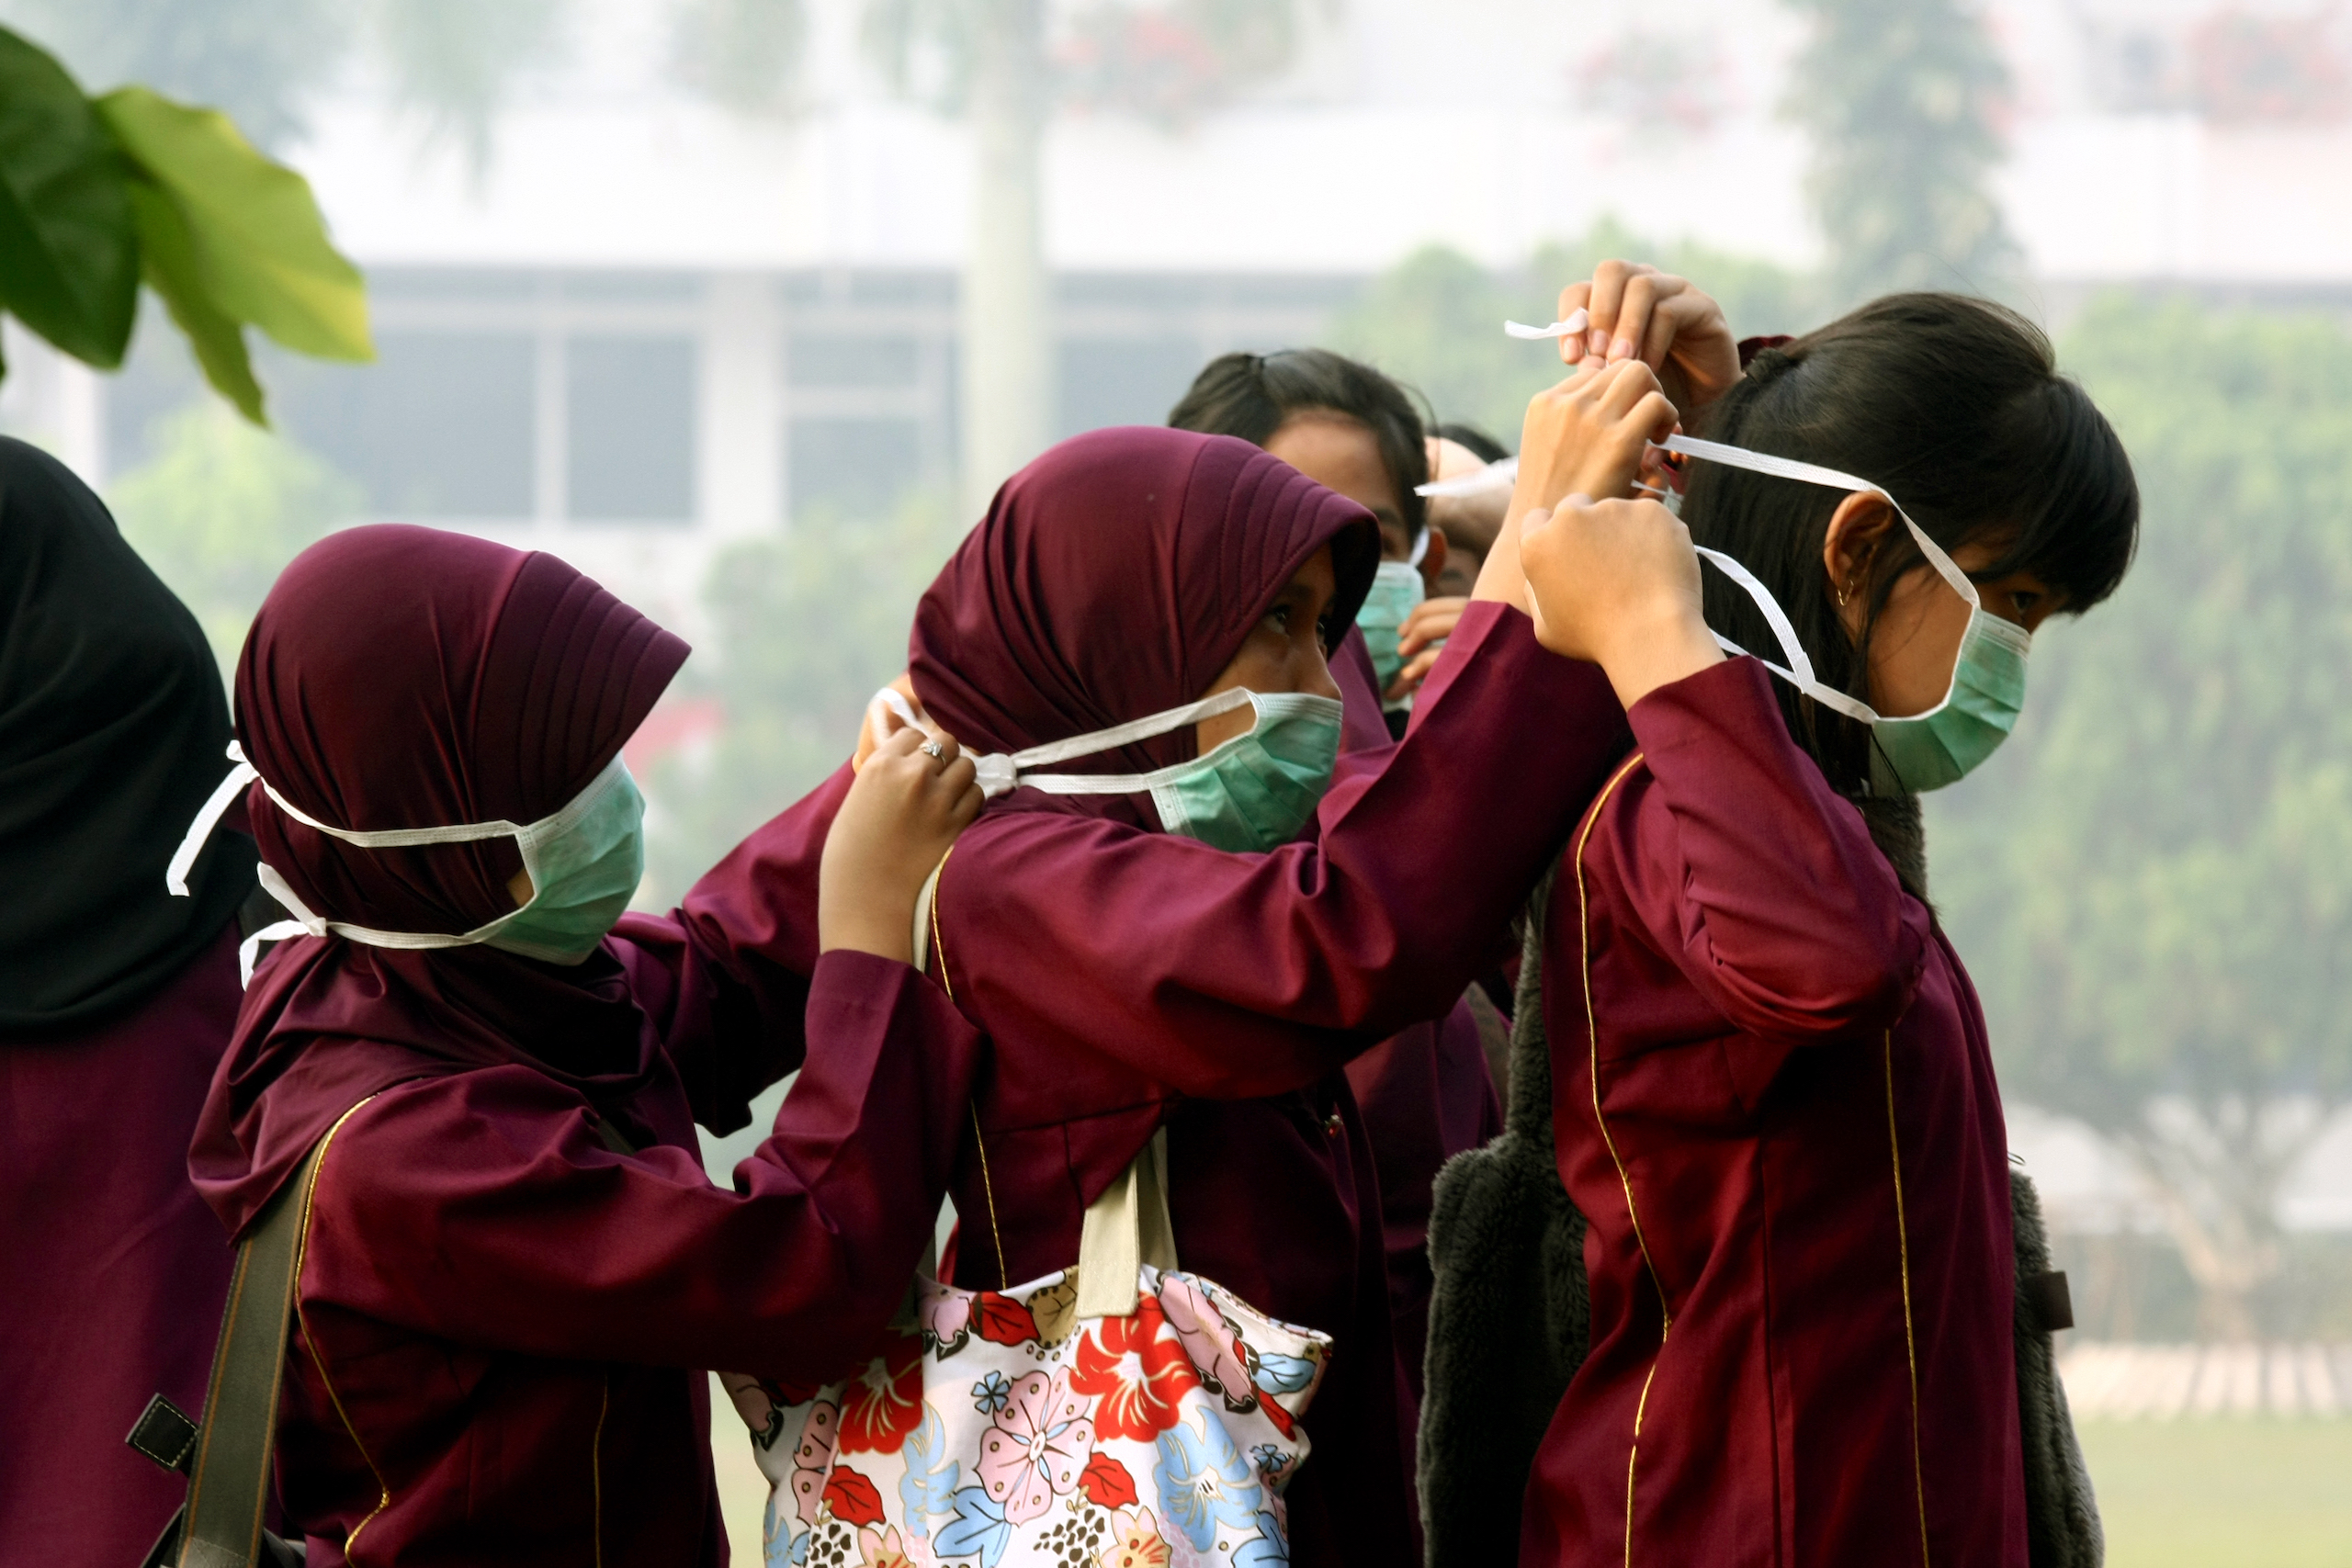 <p>Schoolchildren in Pekanbaru, western Indonesia, put on face masks to protect themselves from smoke caused by forest fires, lit to clear land for oil palm plantations. Photograph taken in 2009. (Image © Greenpeace / Oka Budhi)</p>